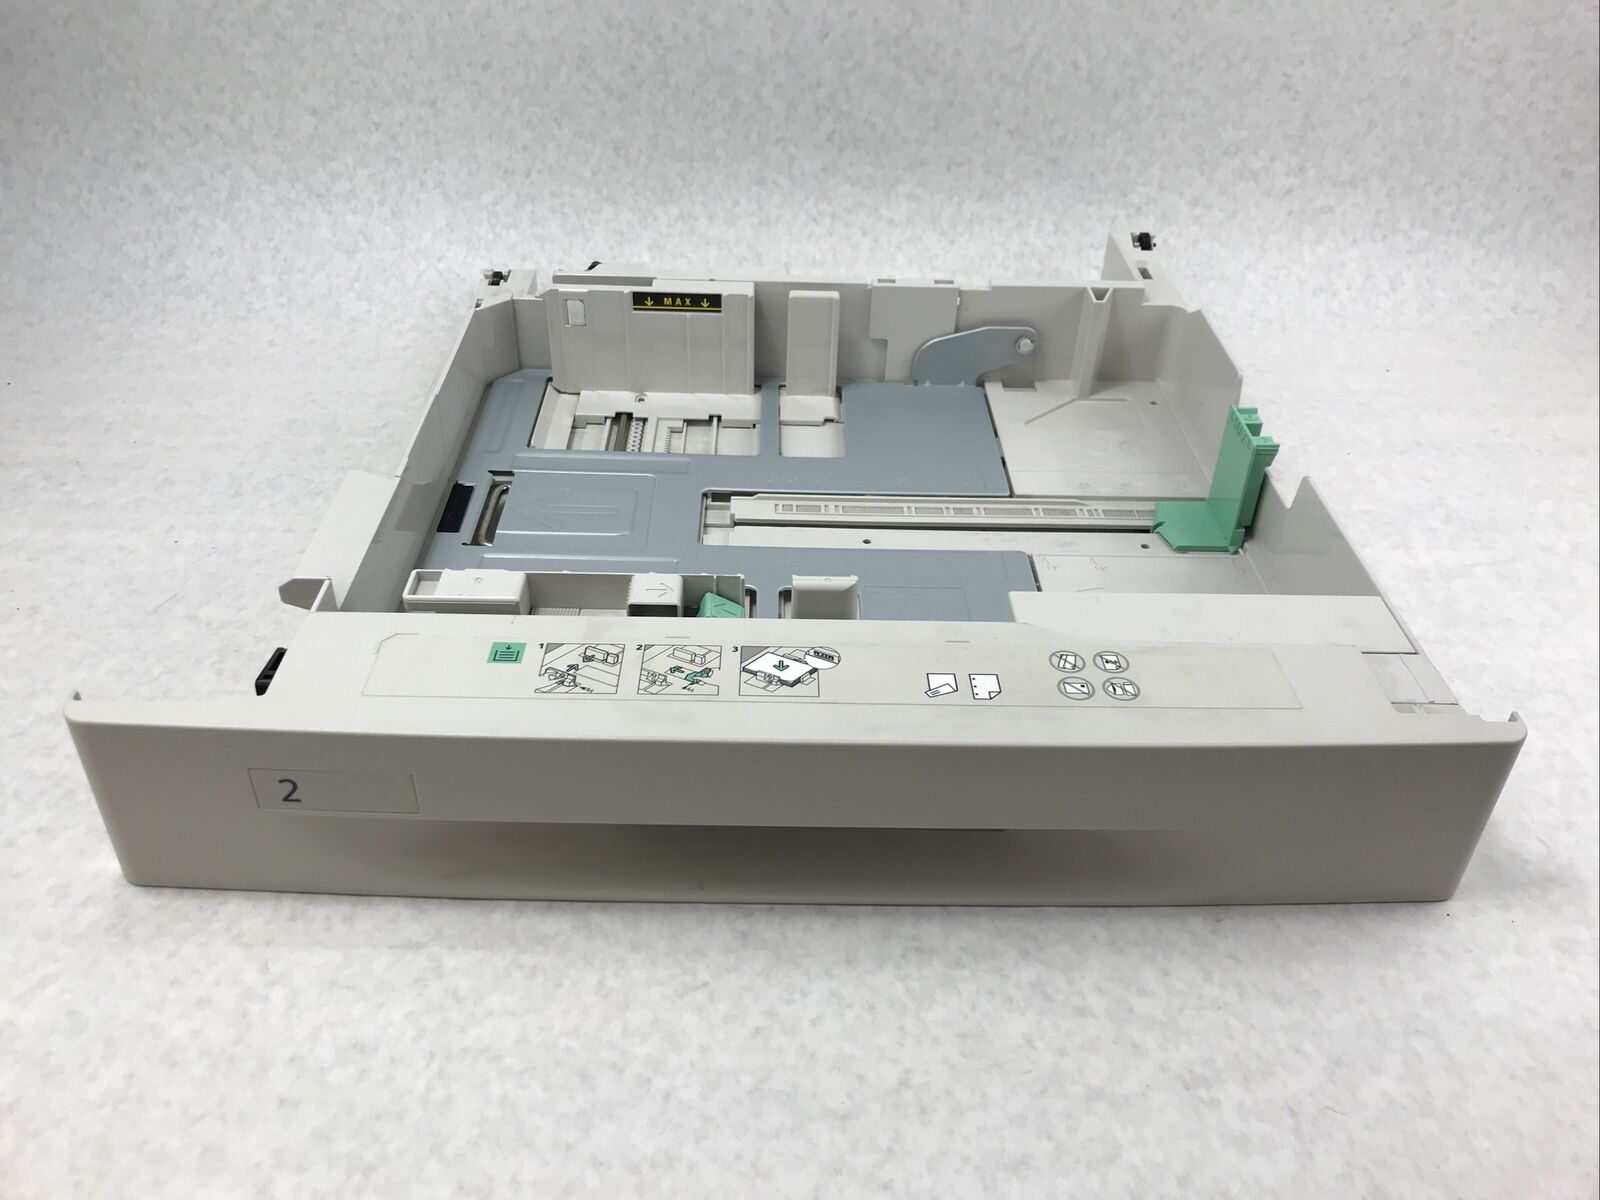 Xerox Workcentre 5335 Paper Tray for Office Printer/Copier